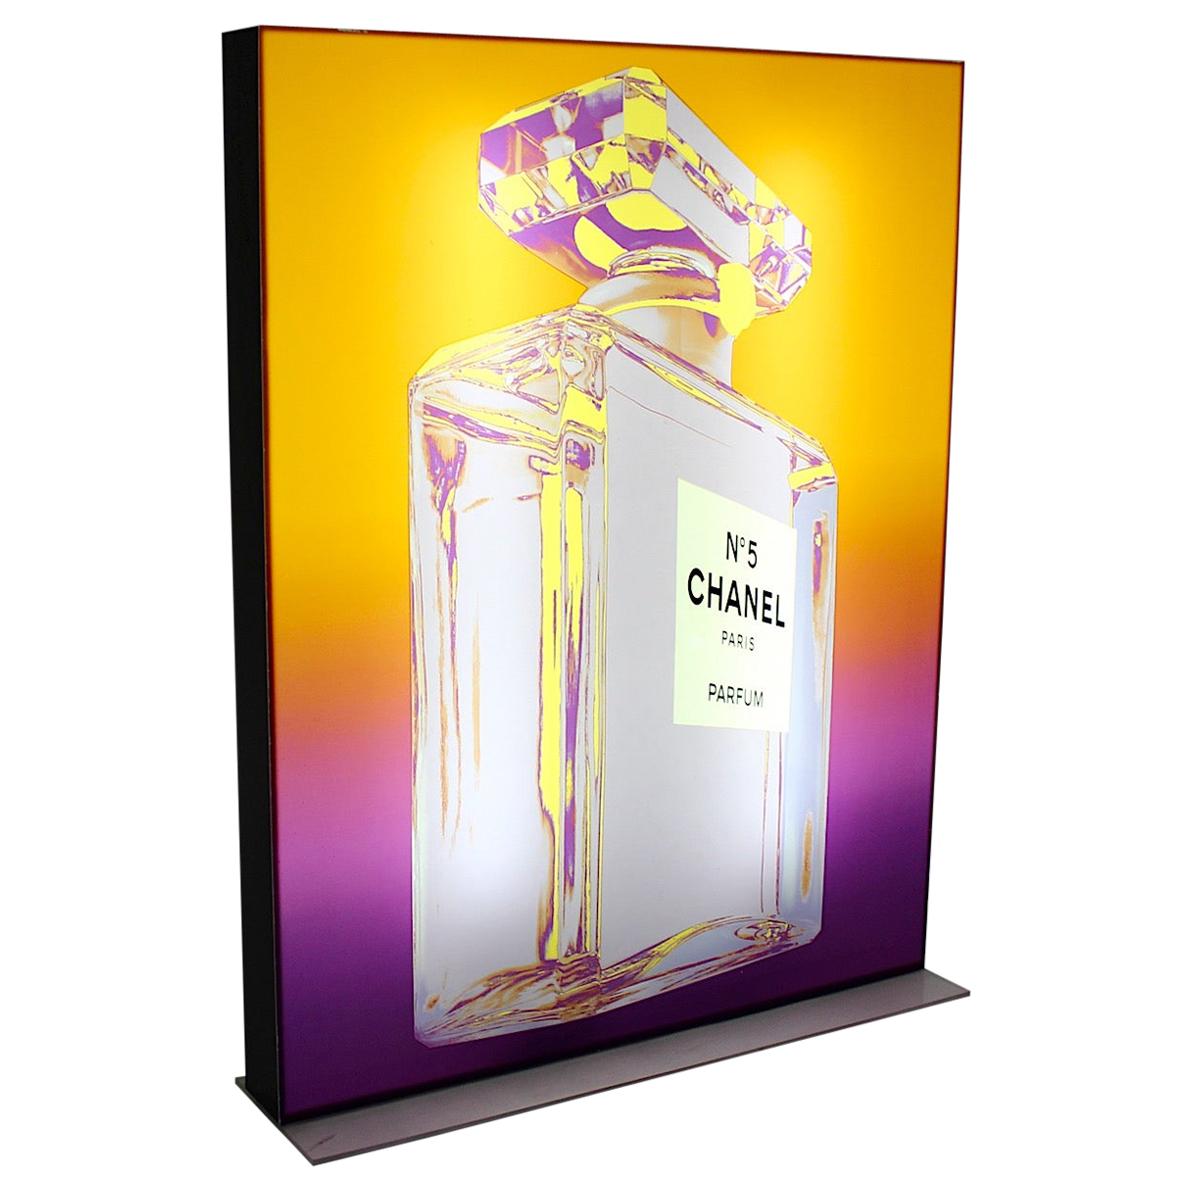 Pop Art Chanel No. 5 Vintage Advertising Lighting Display after Andy Warhol 1999 For Sale